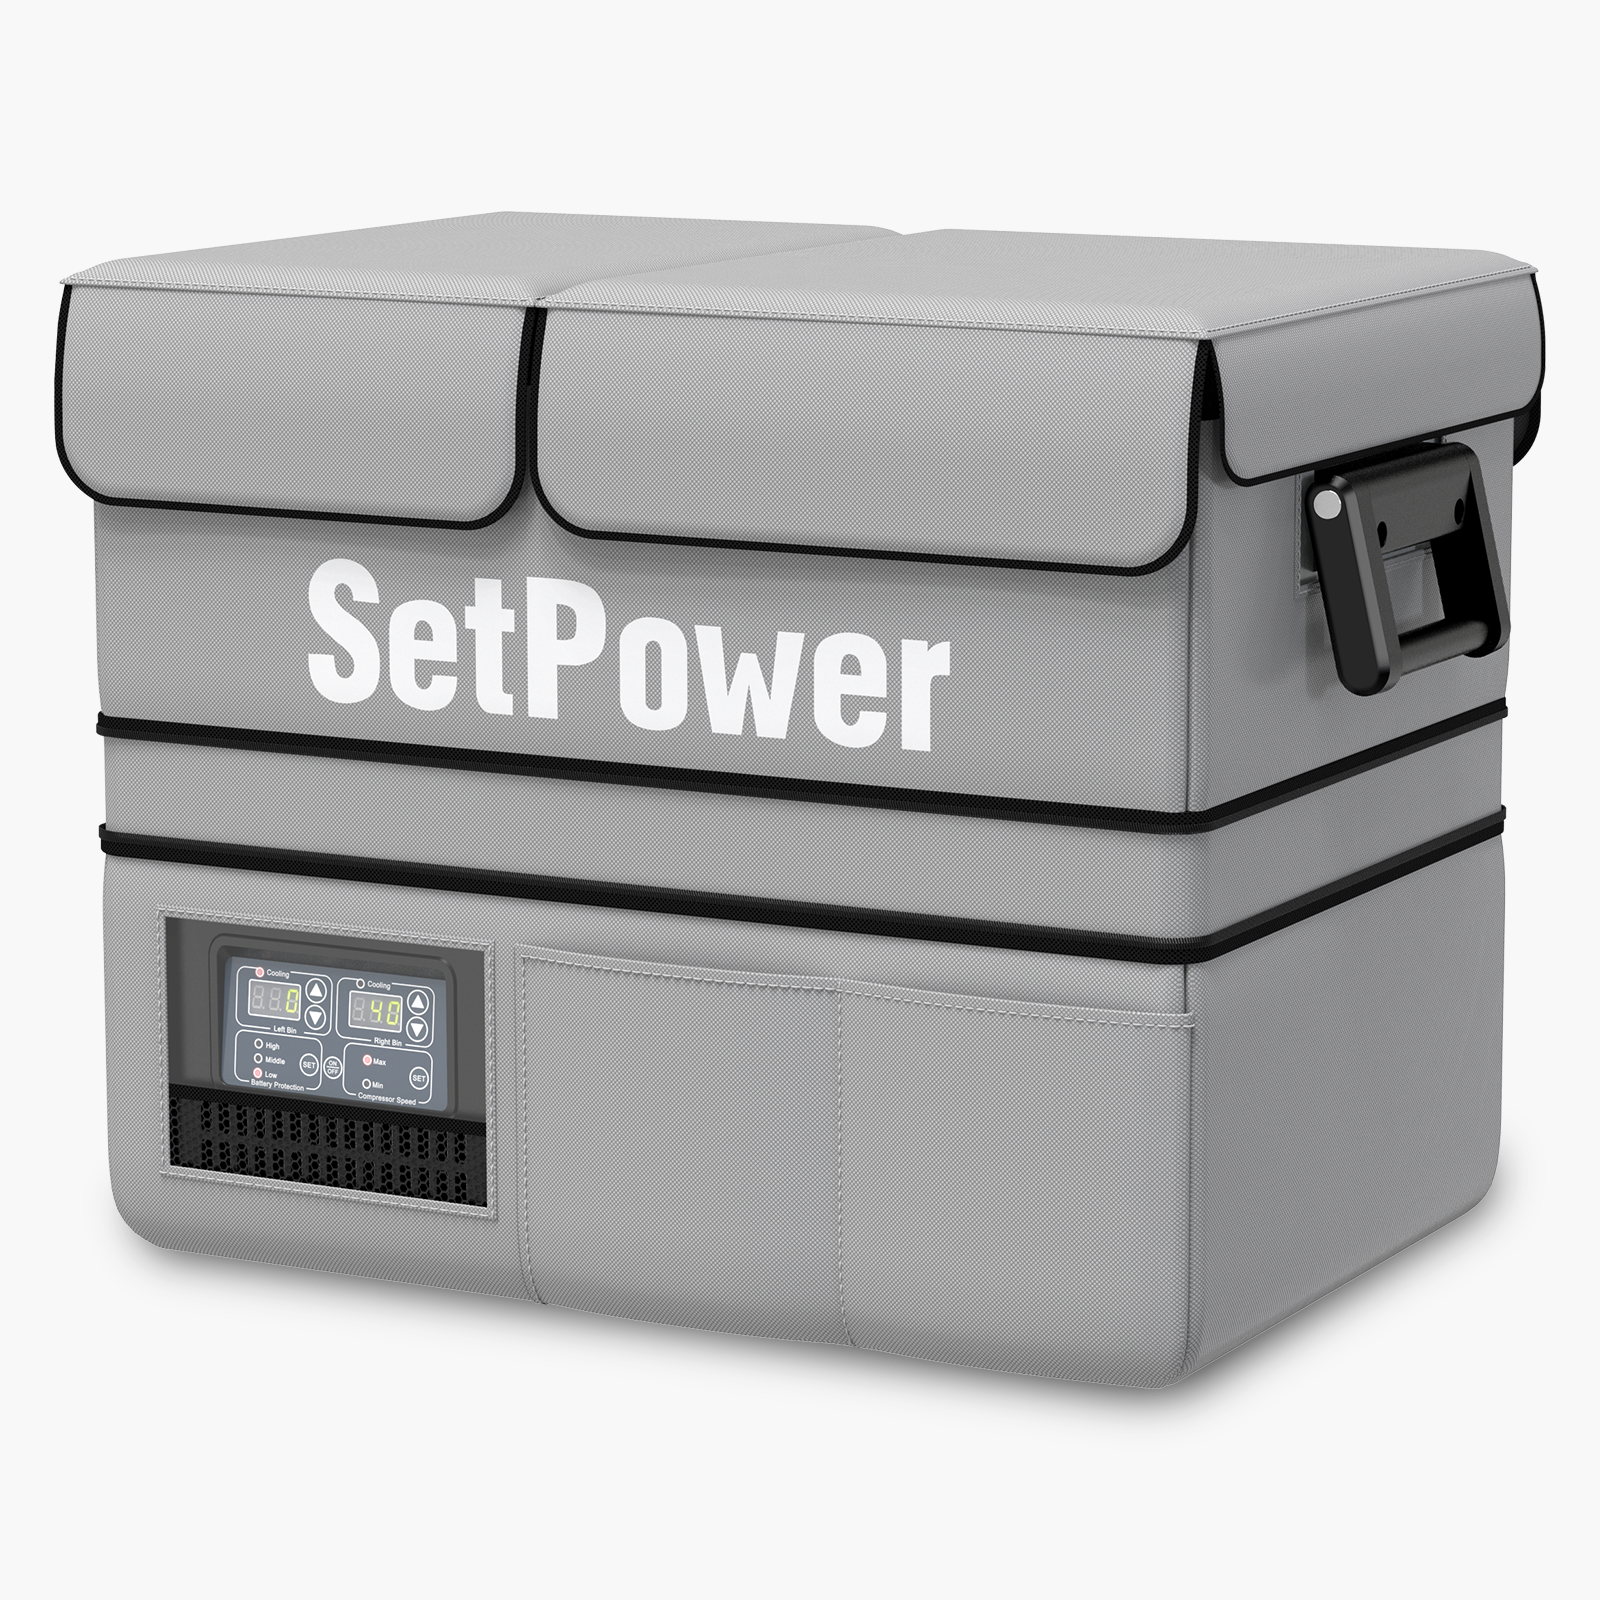 Setpower Insulated Protective Cover For PT35/45/55 Fridge | Ship Out May 8th